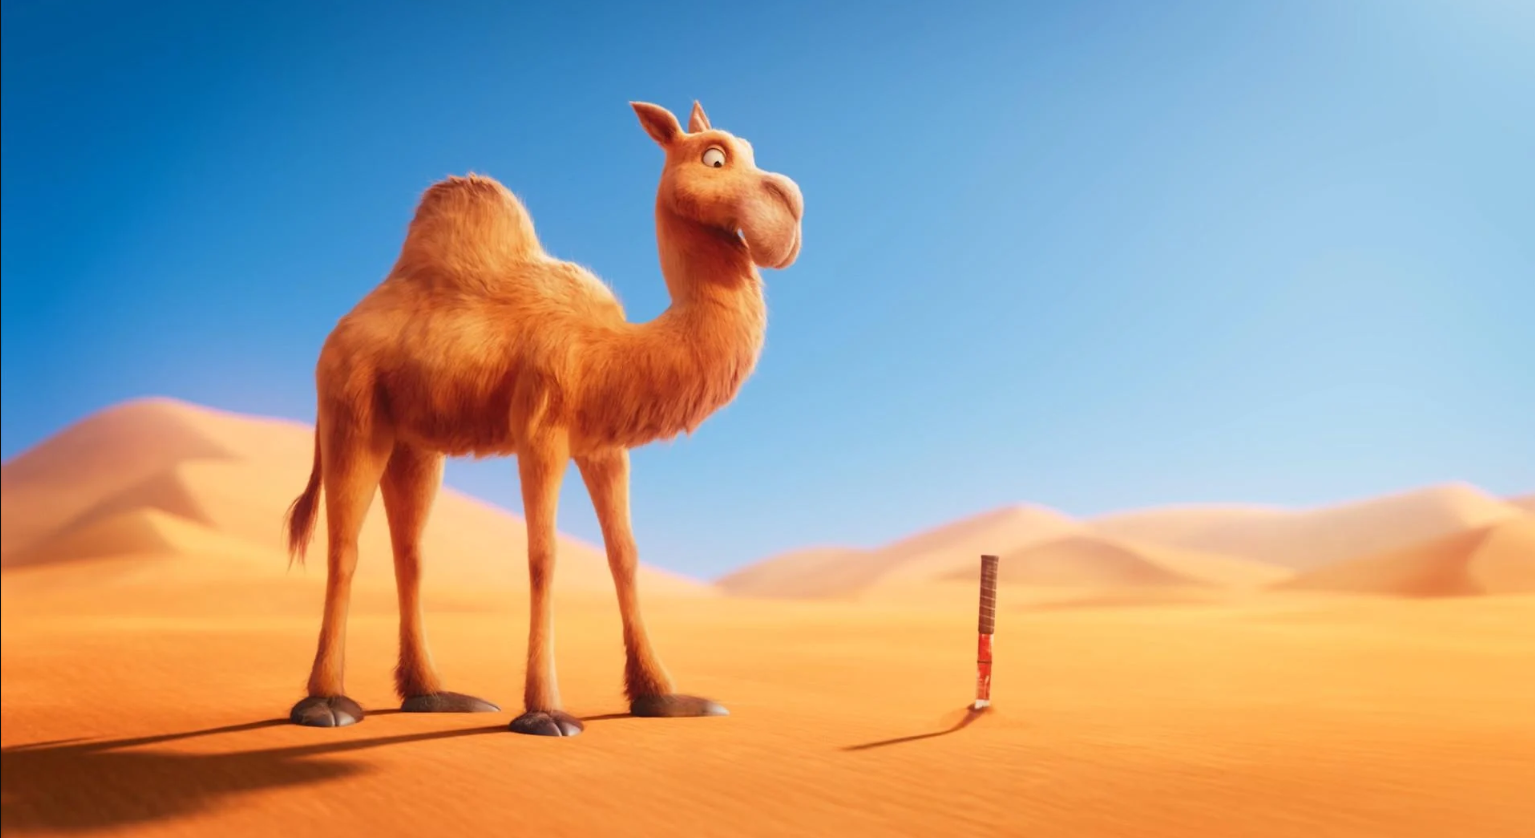 3D illustration of a camel in the dessert looking at an object partially buried in the sand.